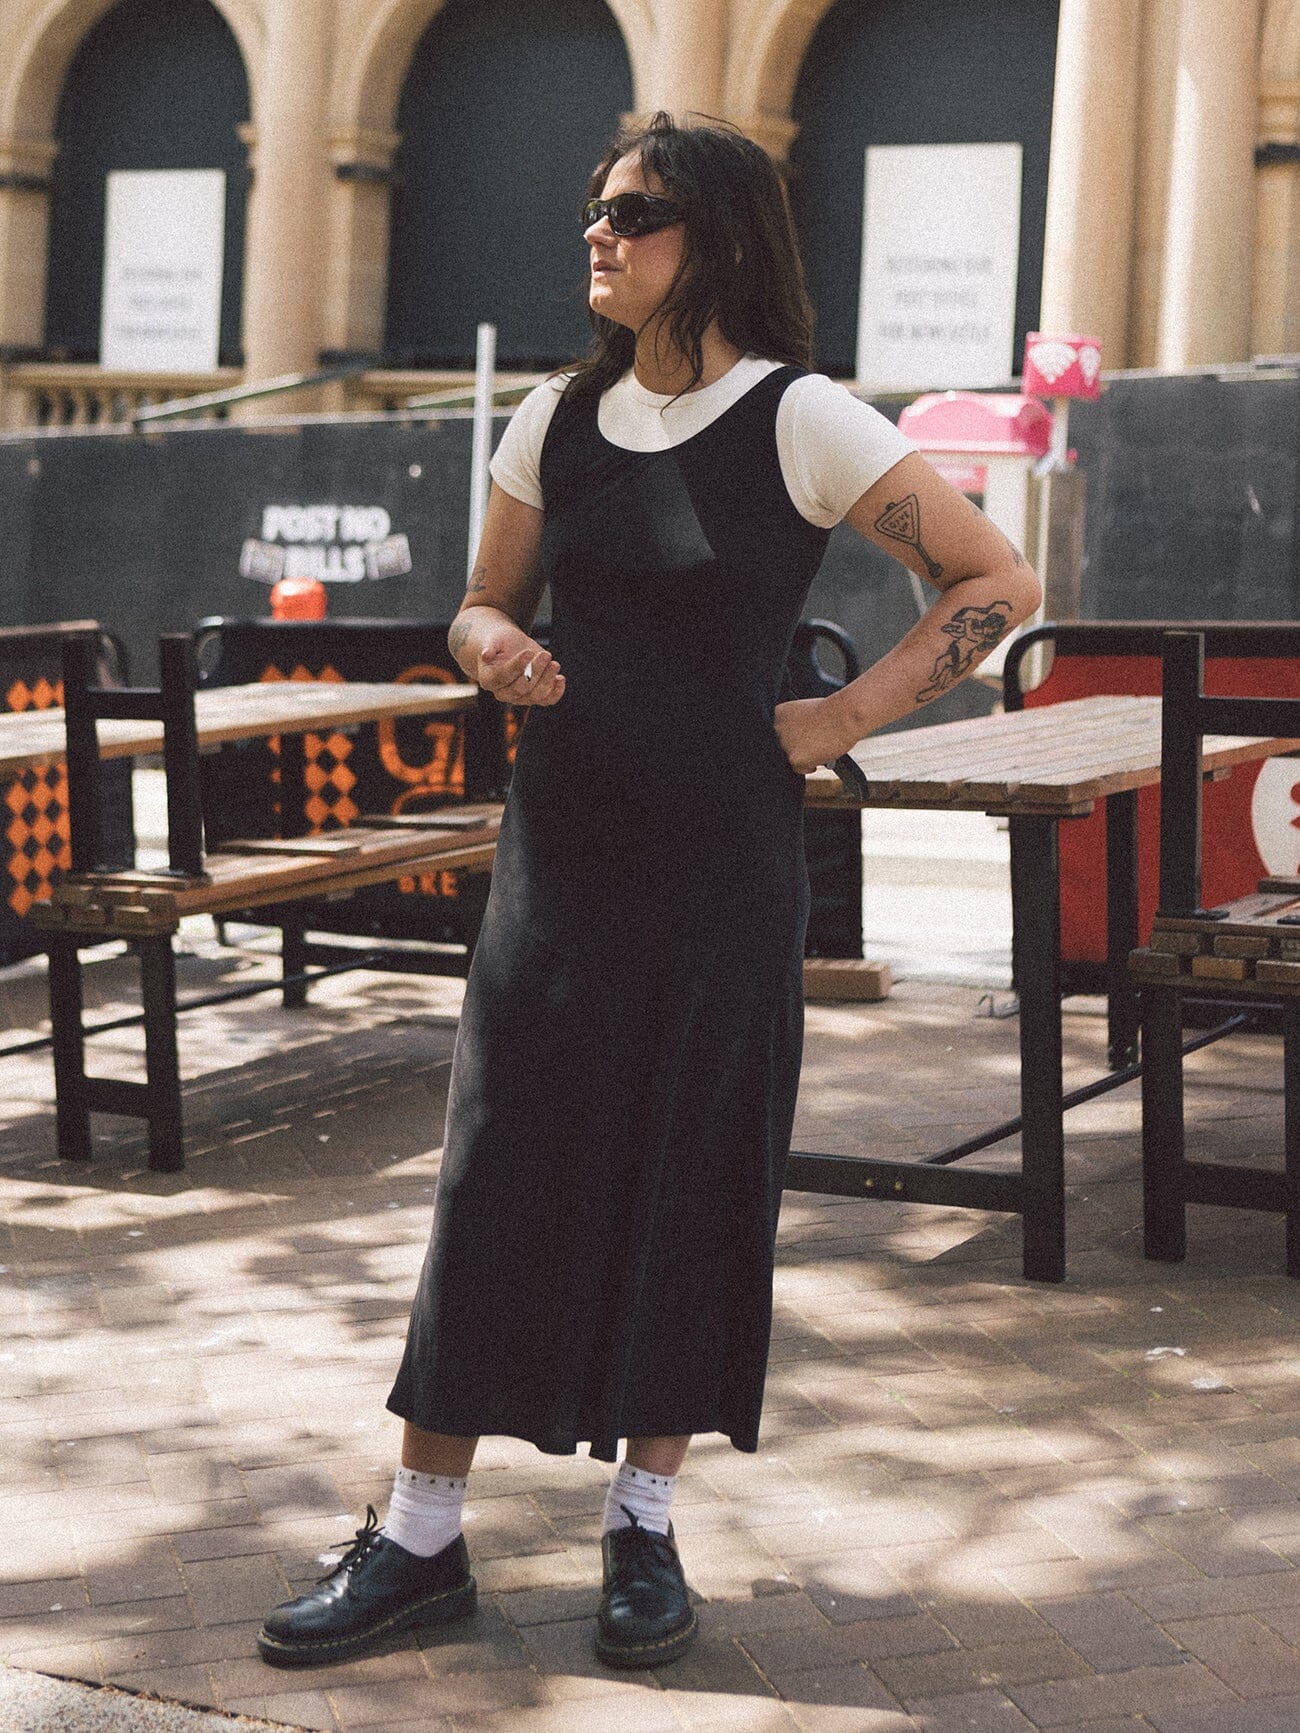 Slip Dresses Over T-shirts: This 90s Trend Is Back! - The Fashion Tag Blog